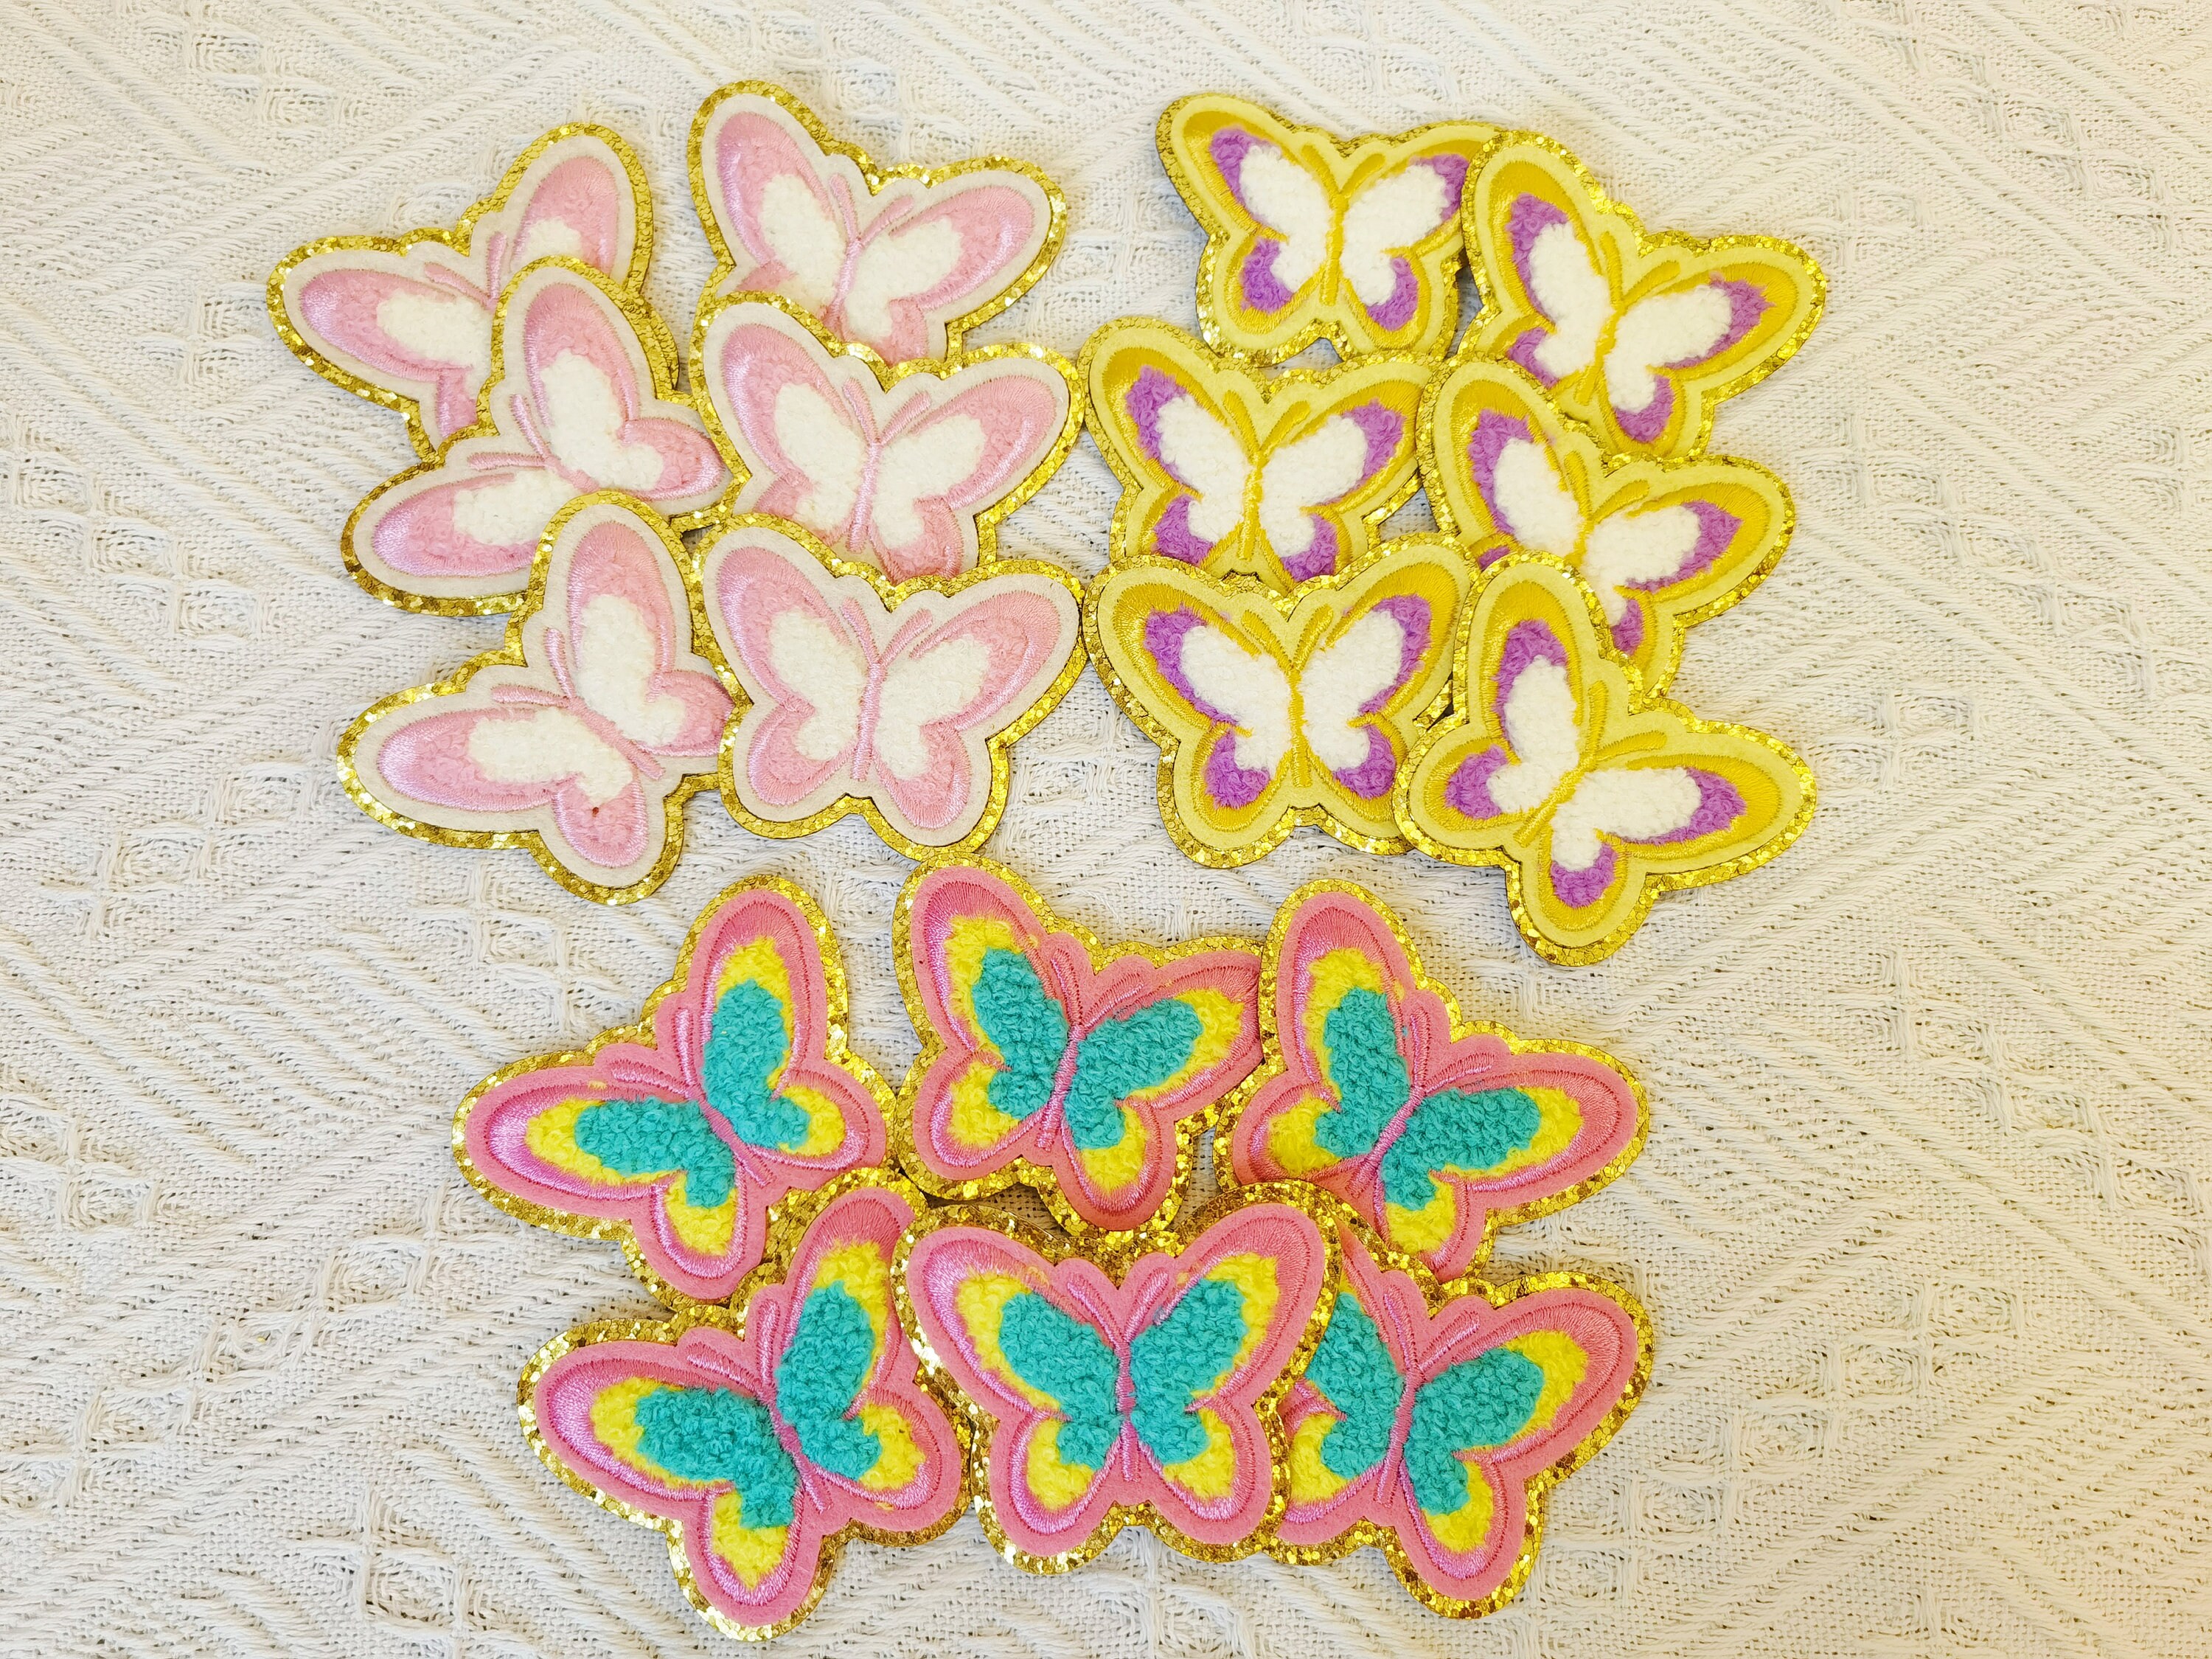 3 Butterfly Iron on Patch Set, Orange/yellow Sew on Butterflies, Clothes  Patches, Embroidered Appliques, Embroidery Craft Supplies 